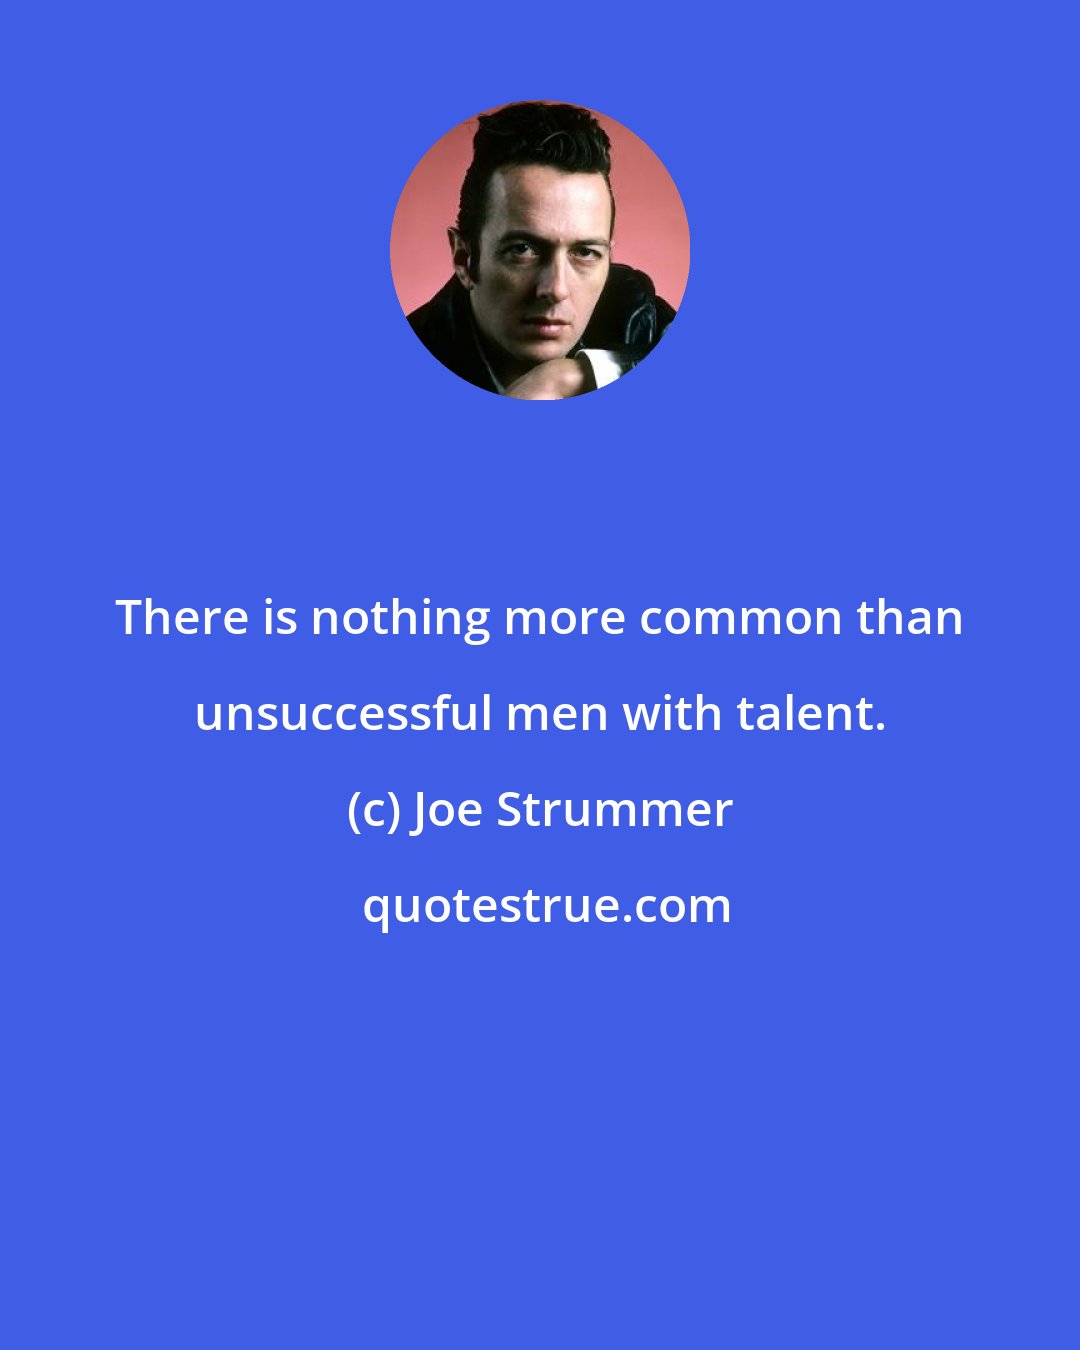 Joe Strummer: There is nothing more common than unsuccessful men with talent.